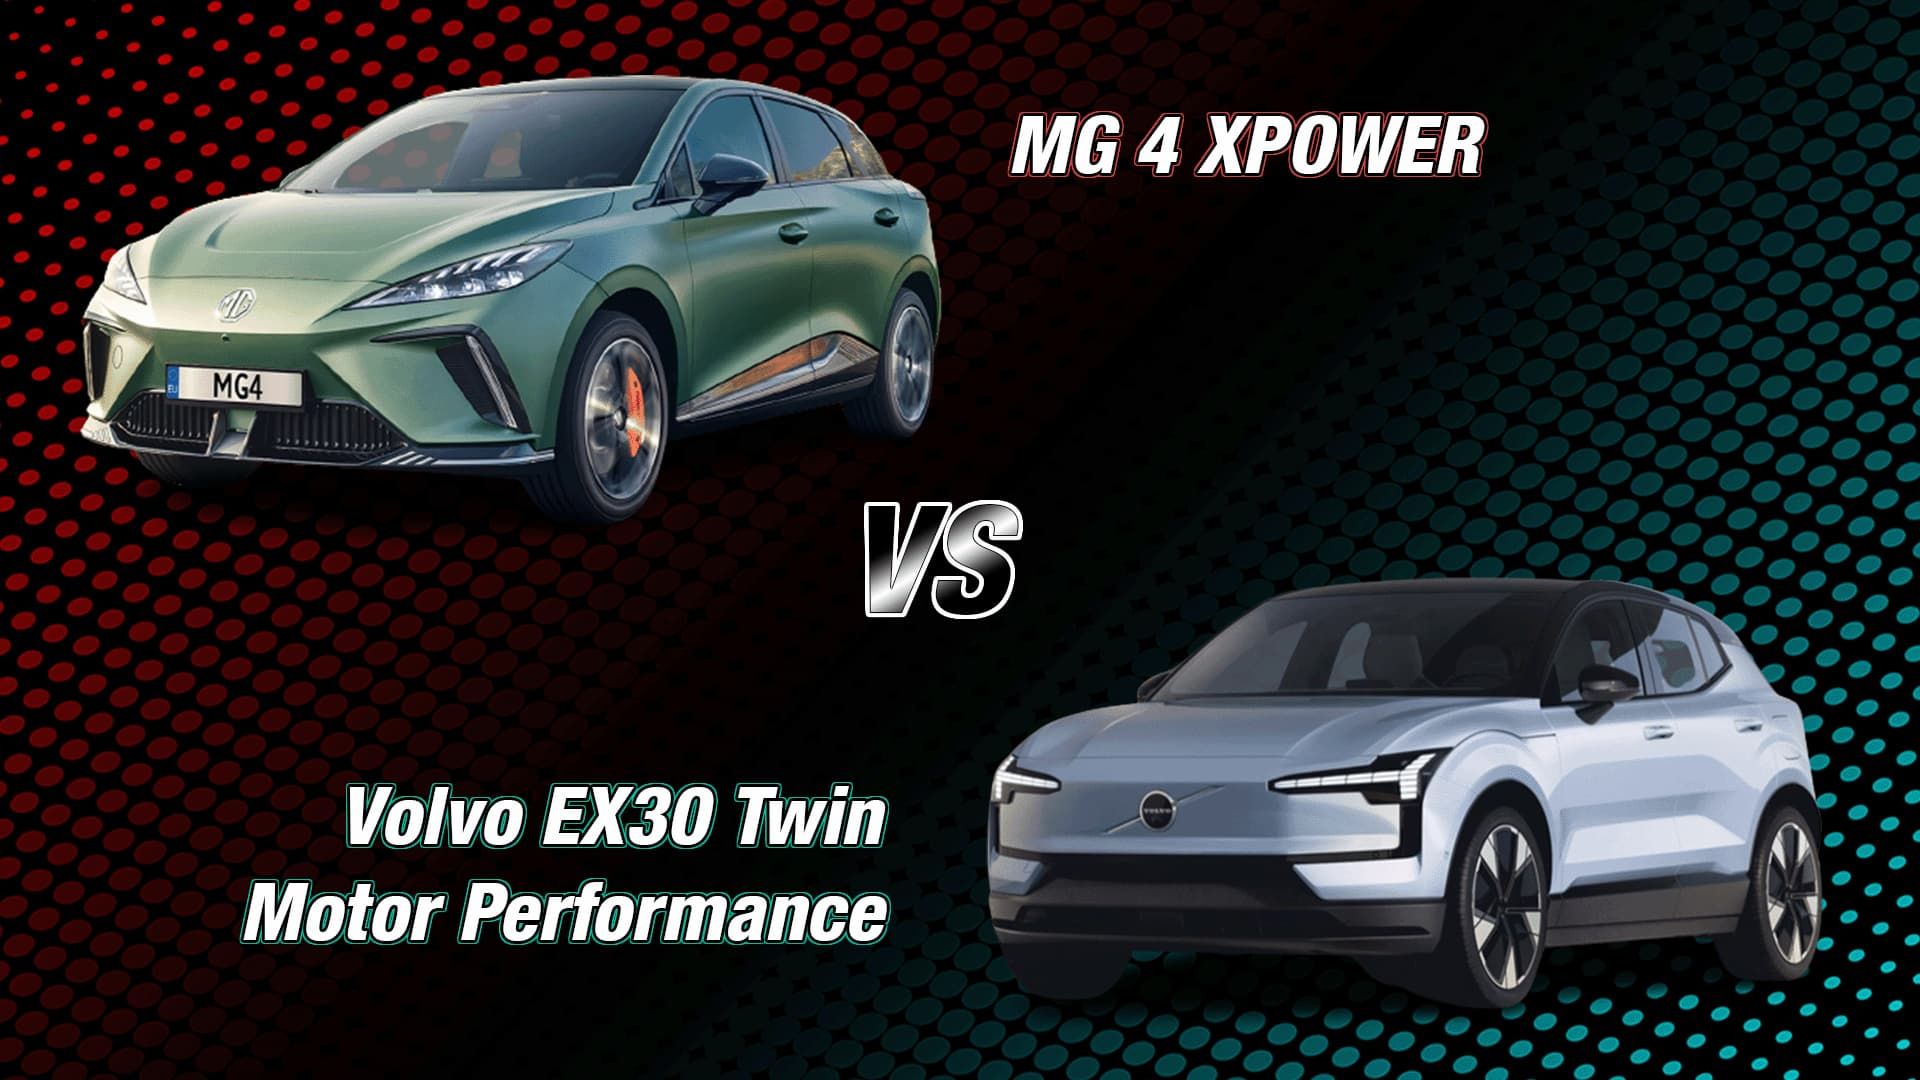 MG4 XPOWER vs Volvo EX30 Twin Motor Performance cover